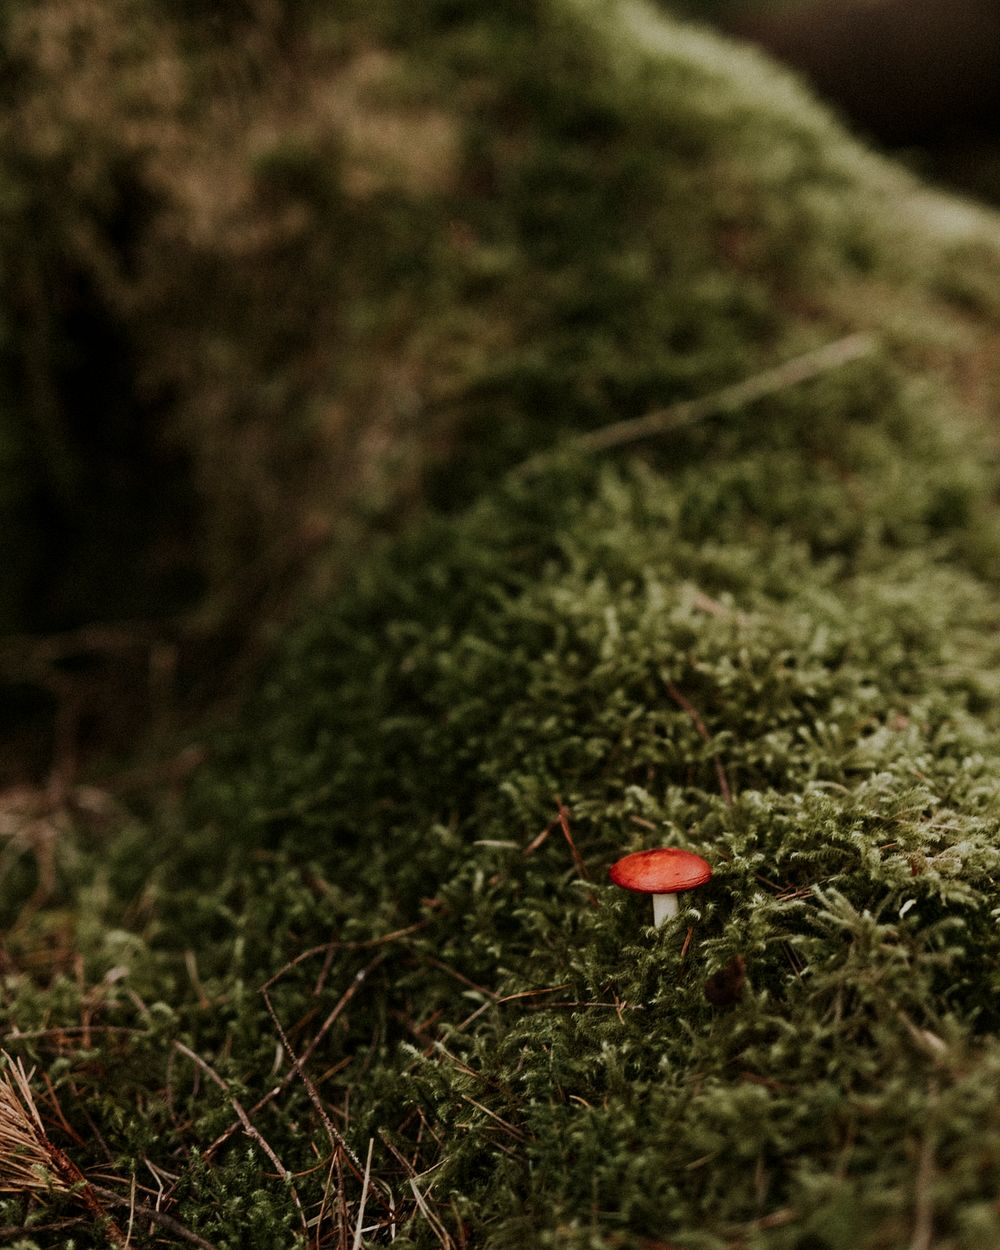 Poisonous mushroom in the moss, Fairy Pools at Isle of Skye, Scotland